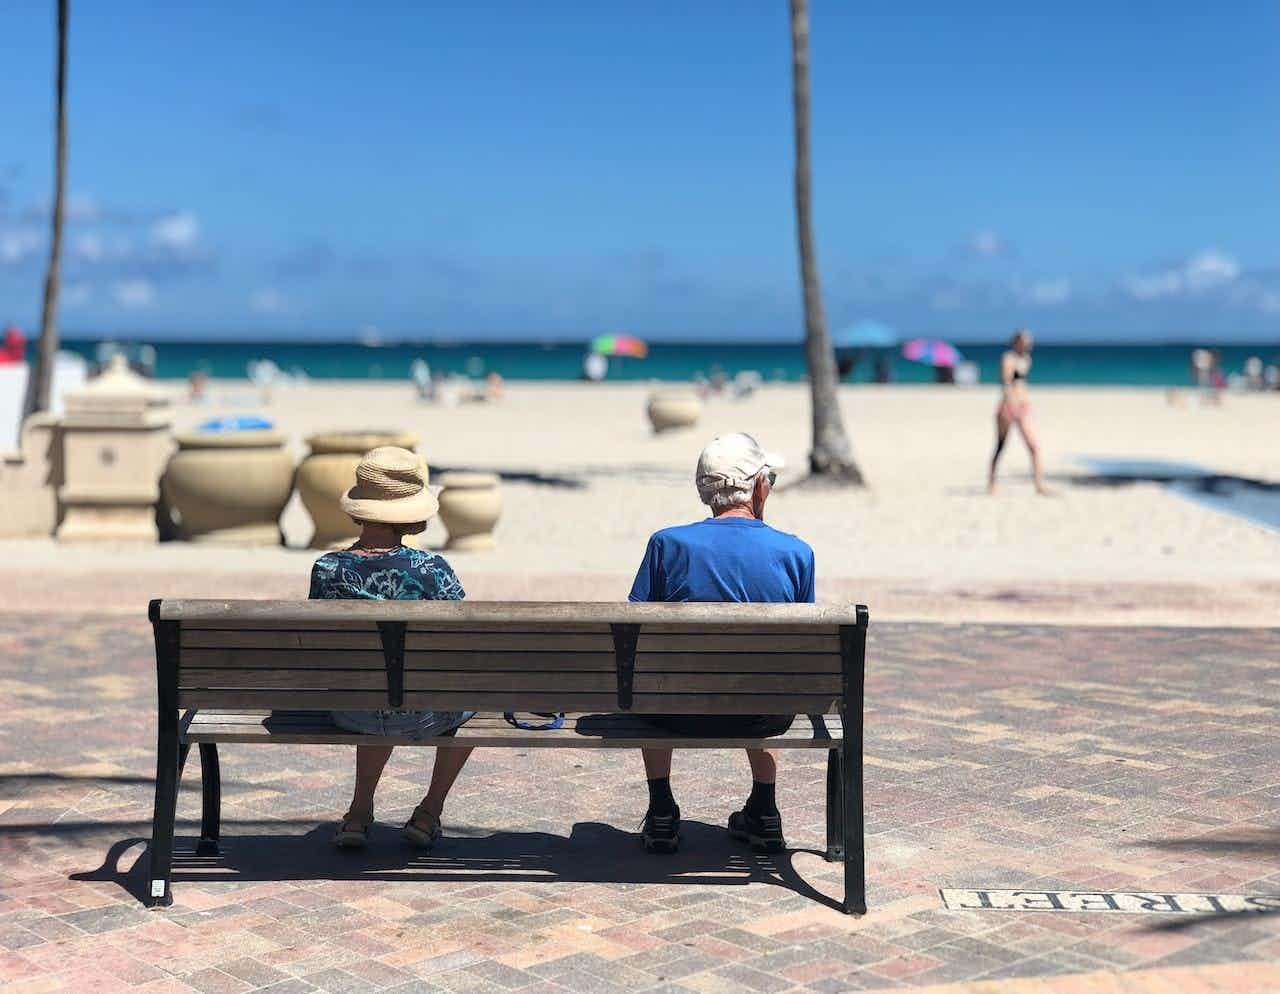 What are the best singles holidays for over 70s?